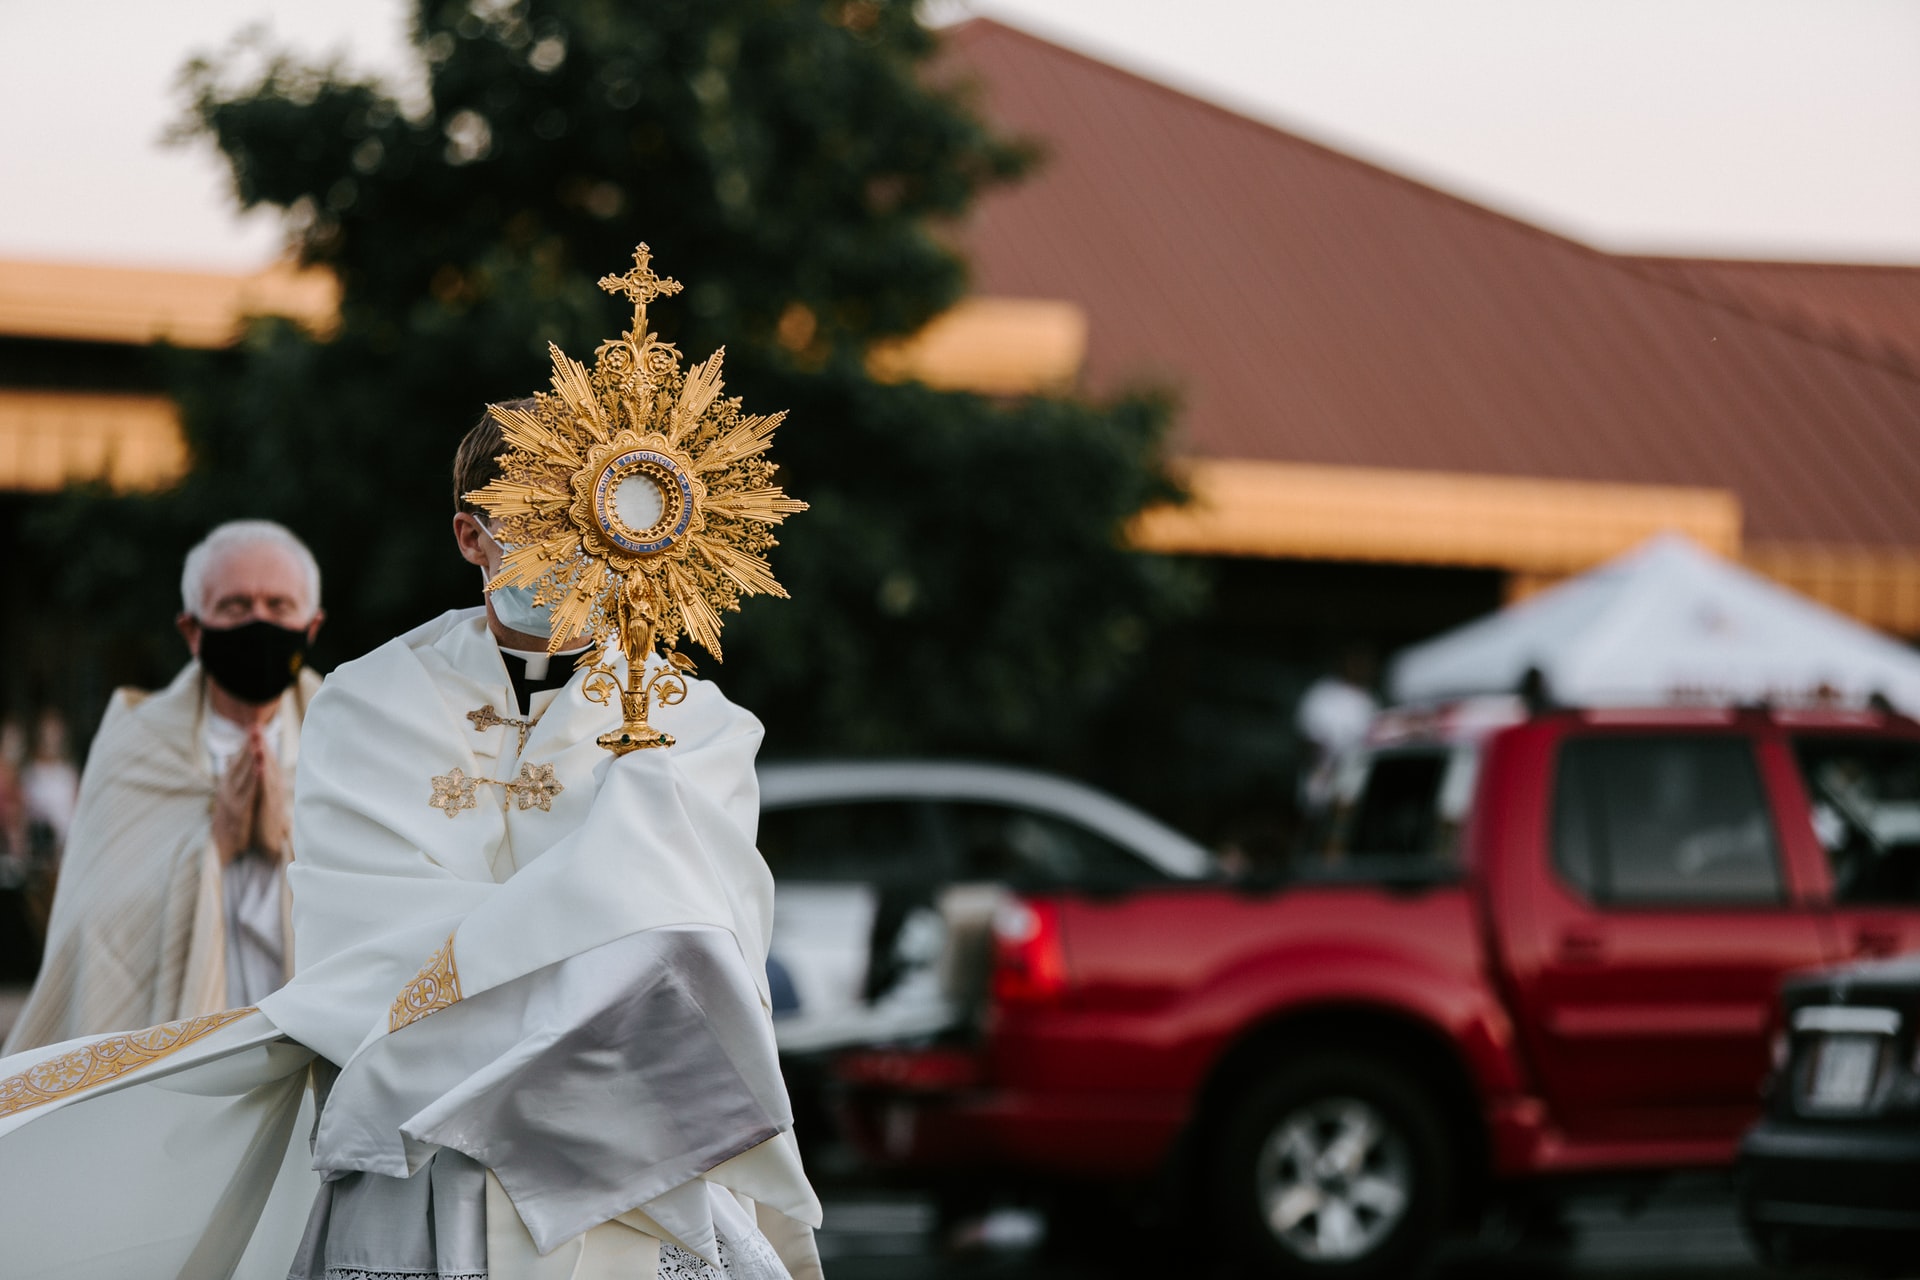 A priest wearing a face mask raises up the Monstrance